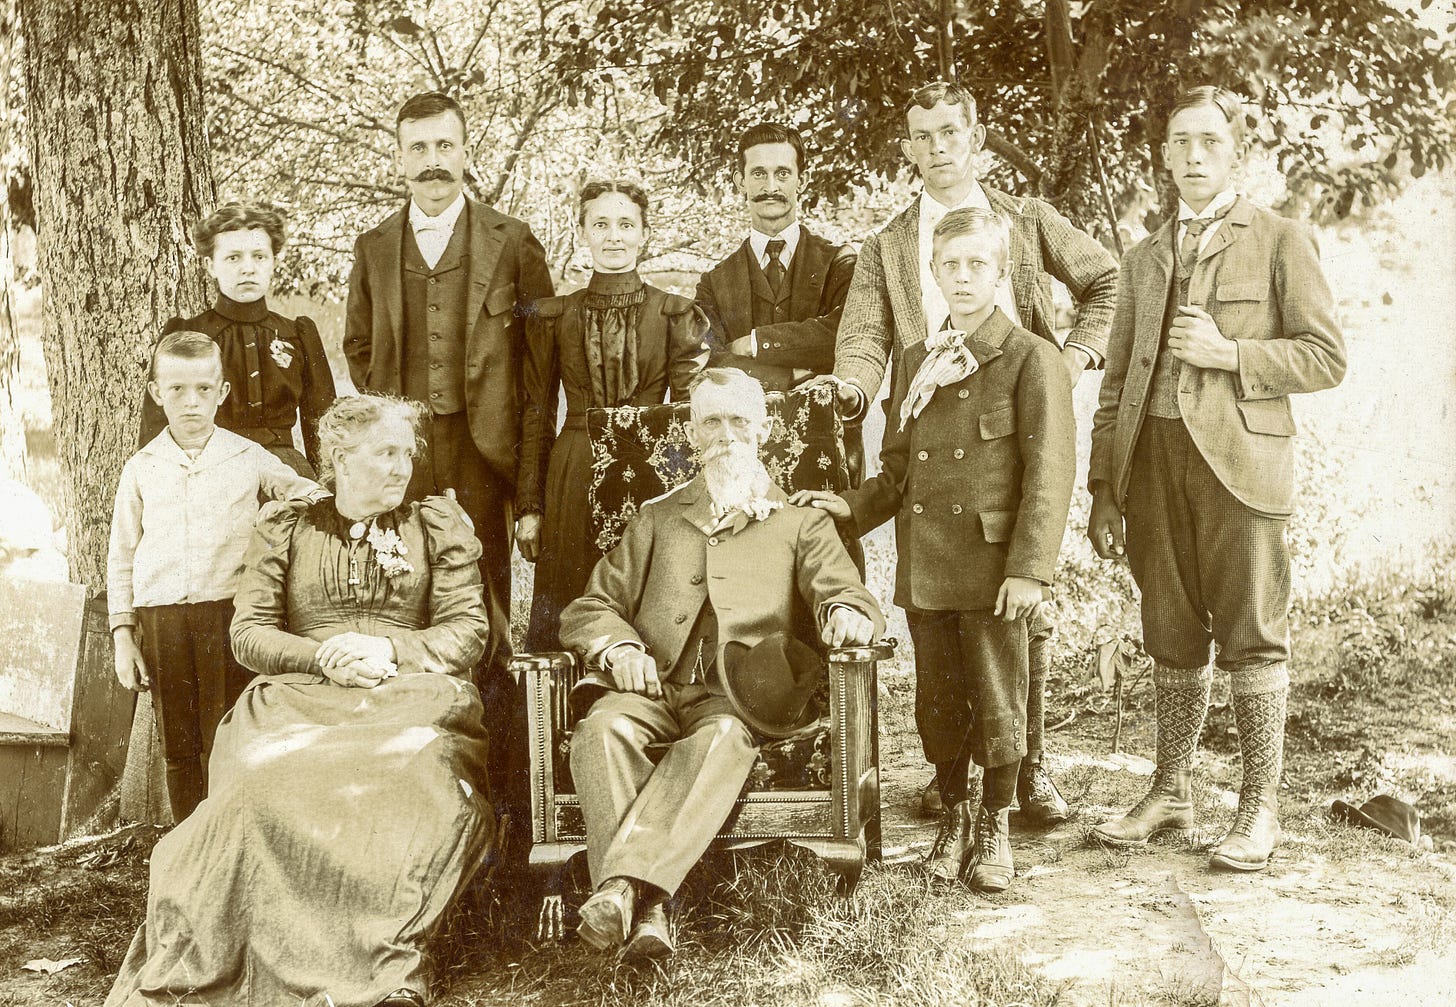 George Hardy seated, surrounded by family members